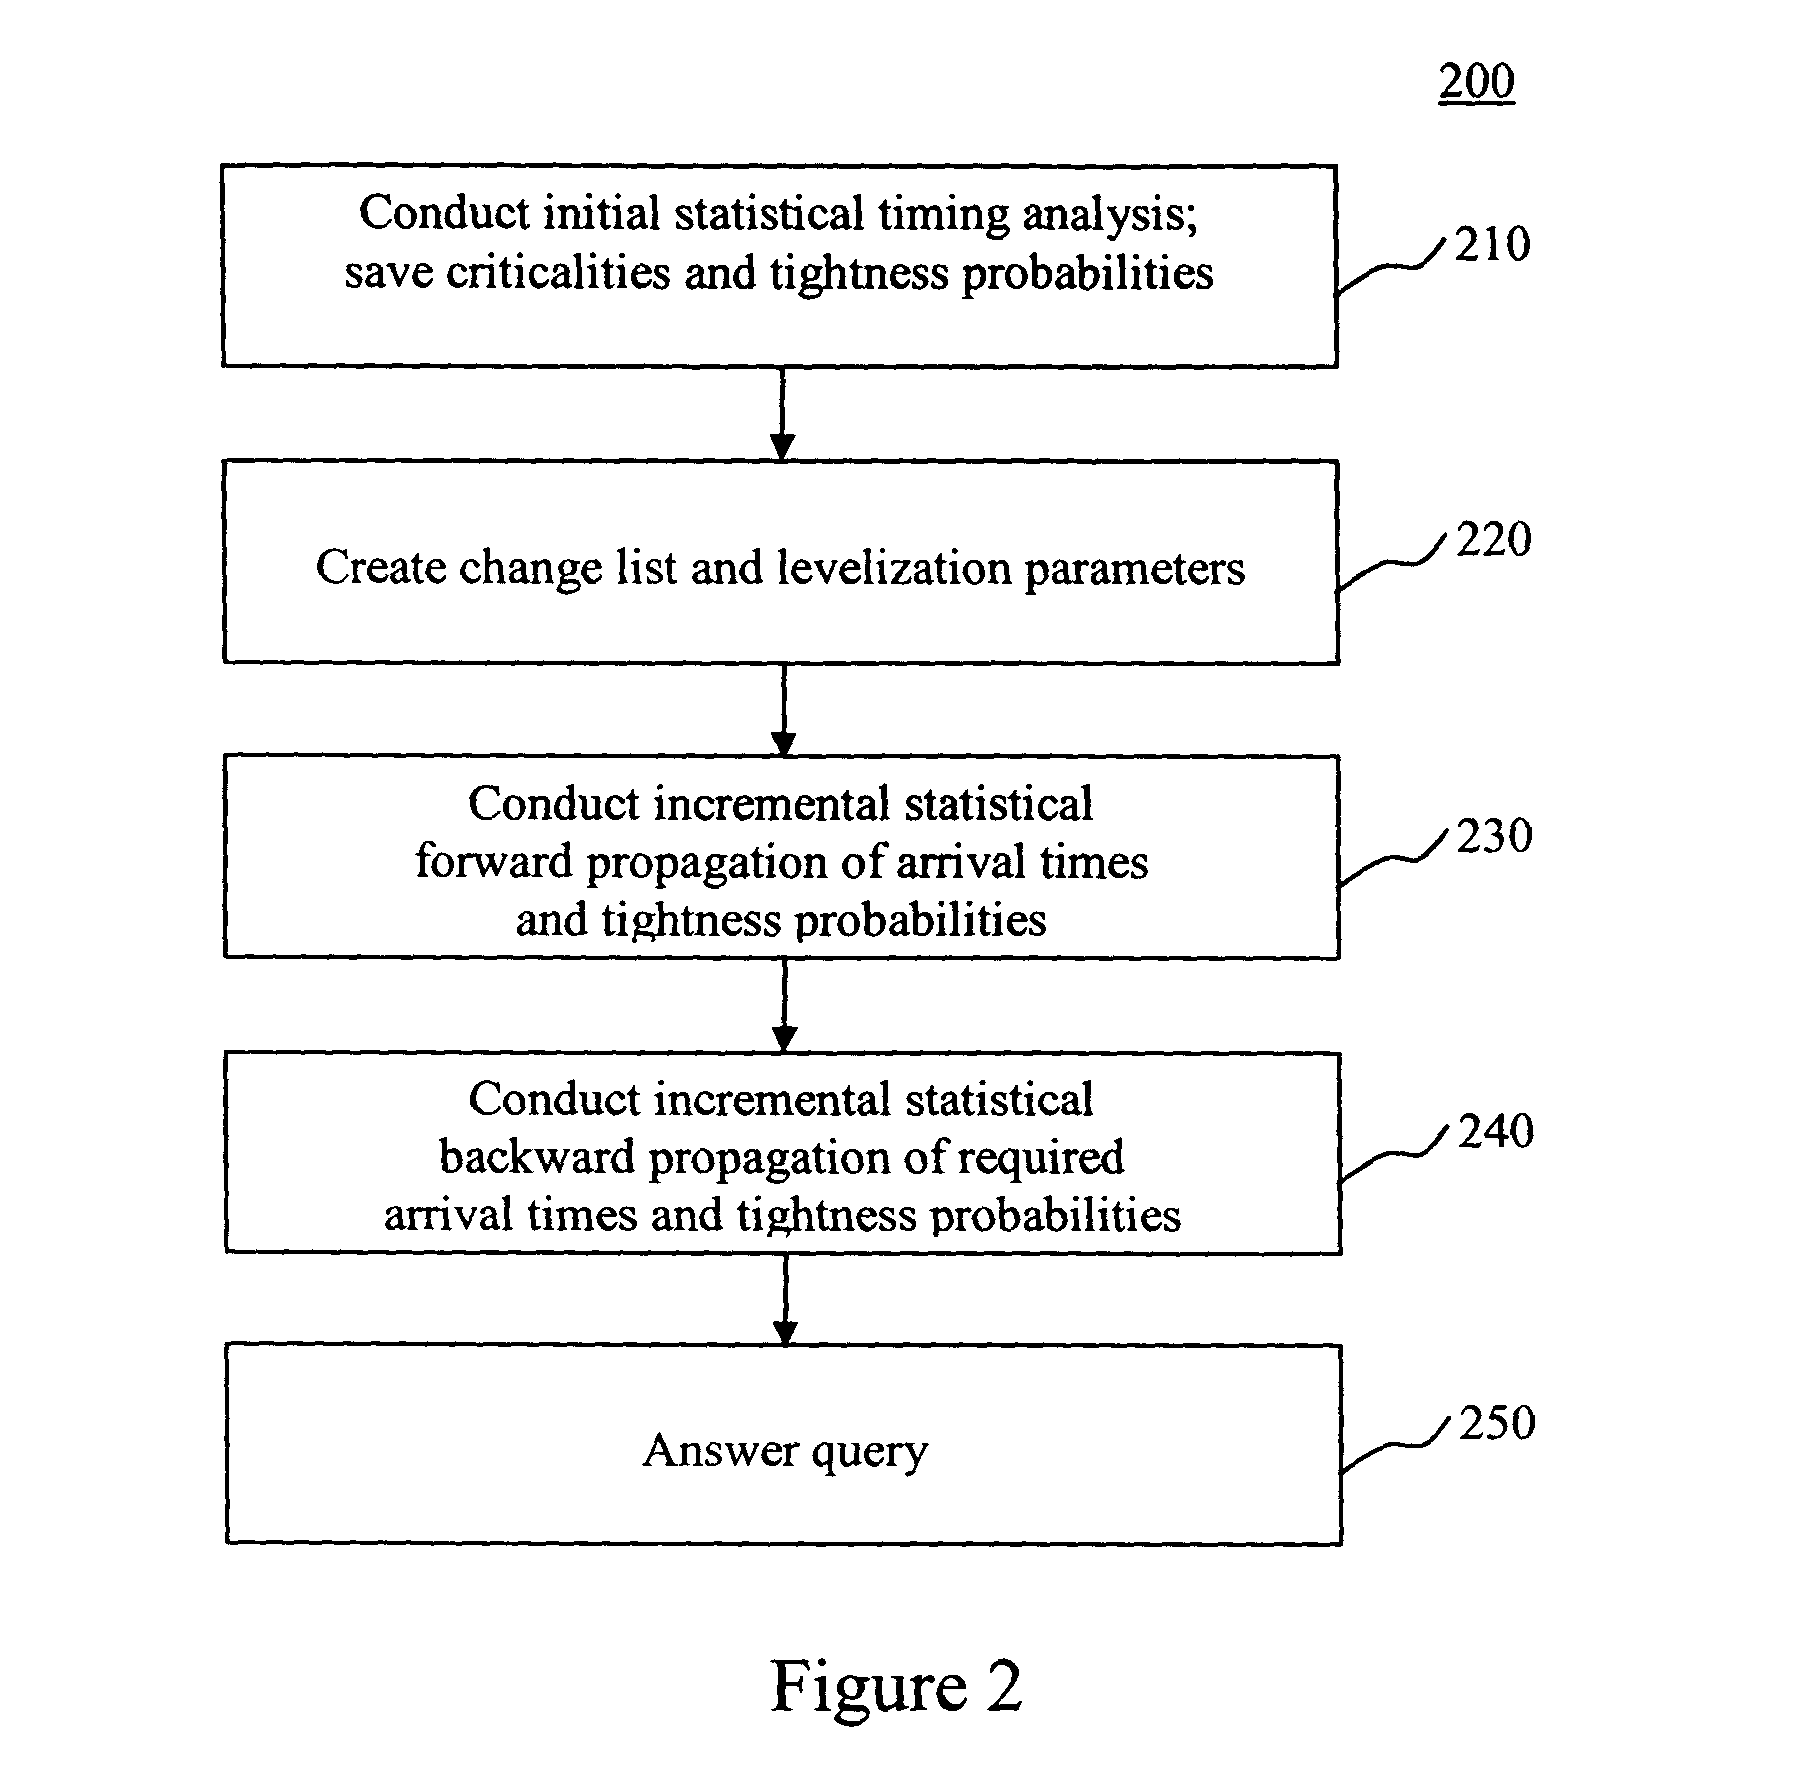 System and method for incremental statistical timing analysis of digital circuits